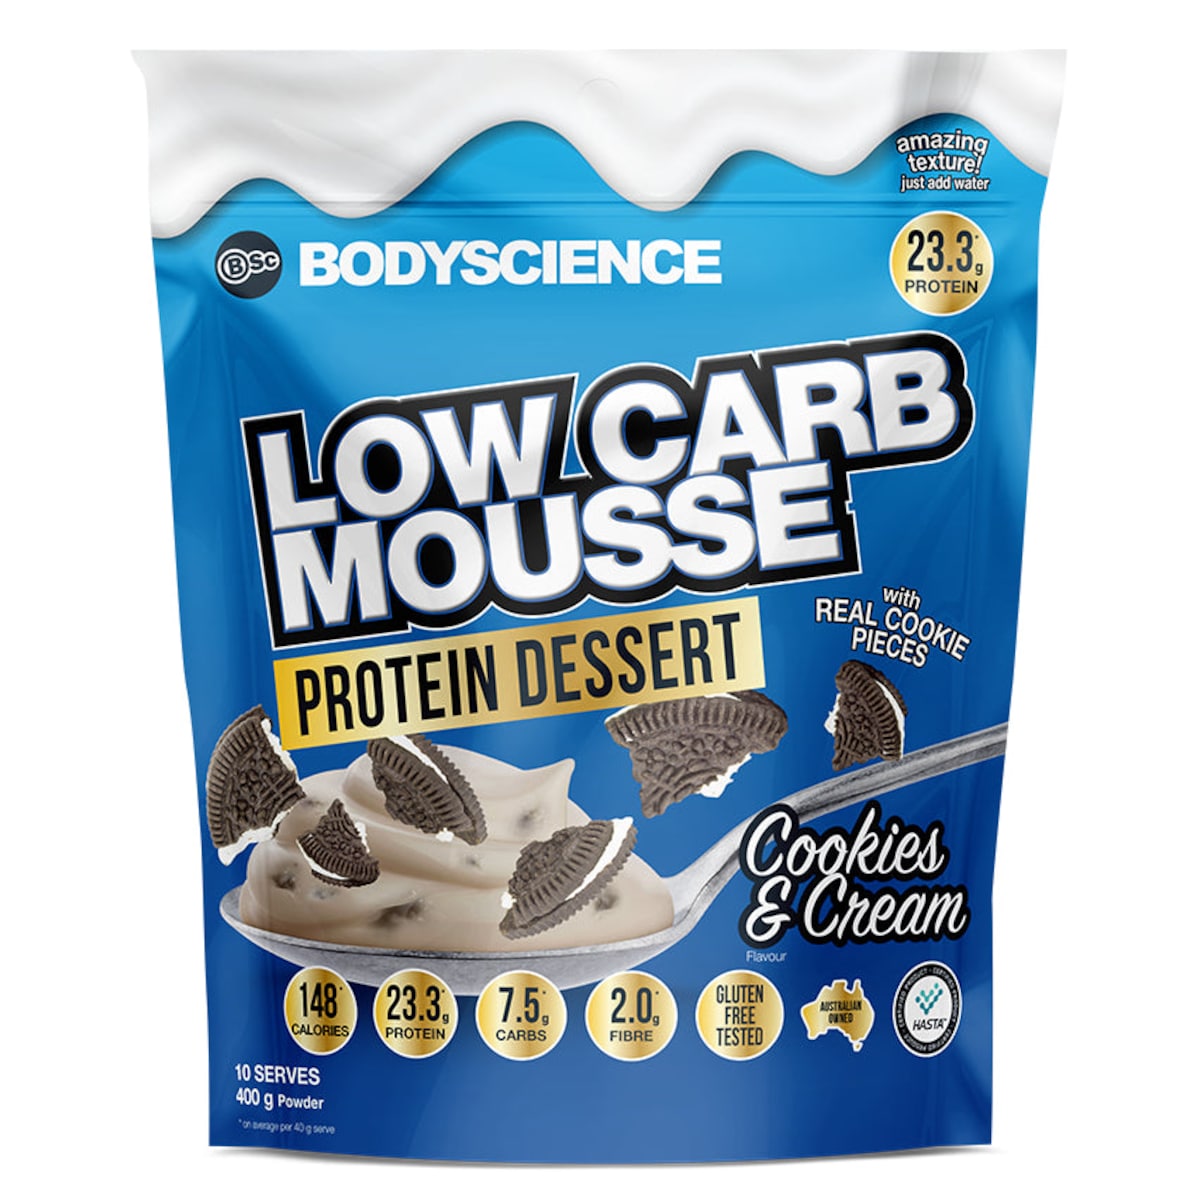 BSc Body Science Low Carb Mousse Protein Dessert Cookies & Cream 400g